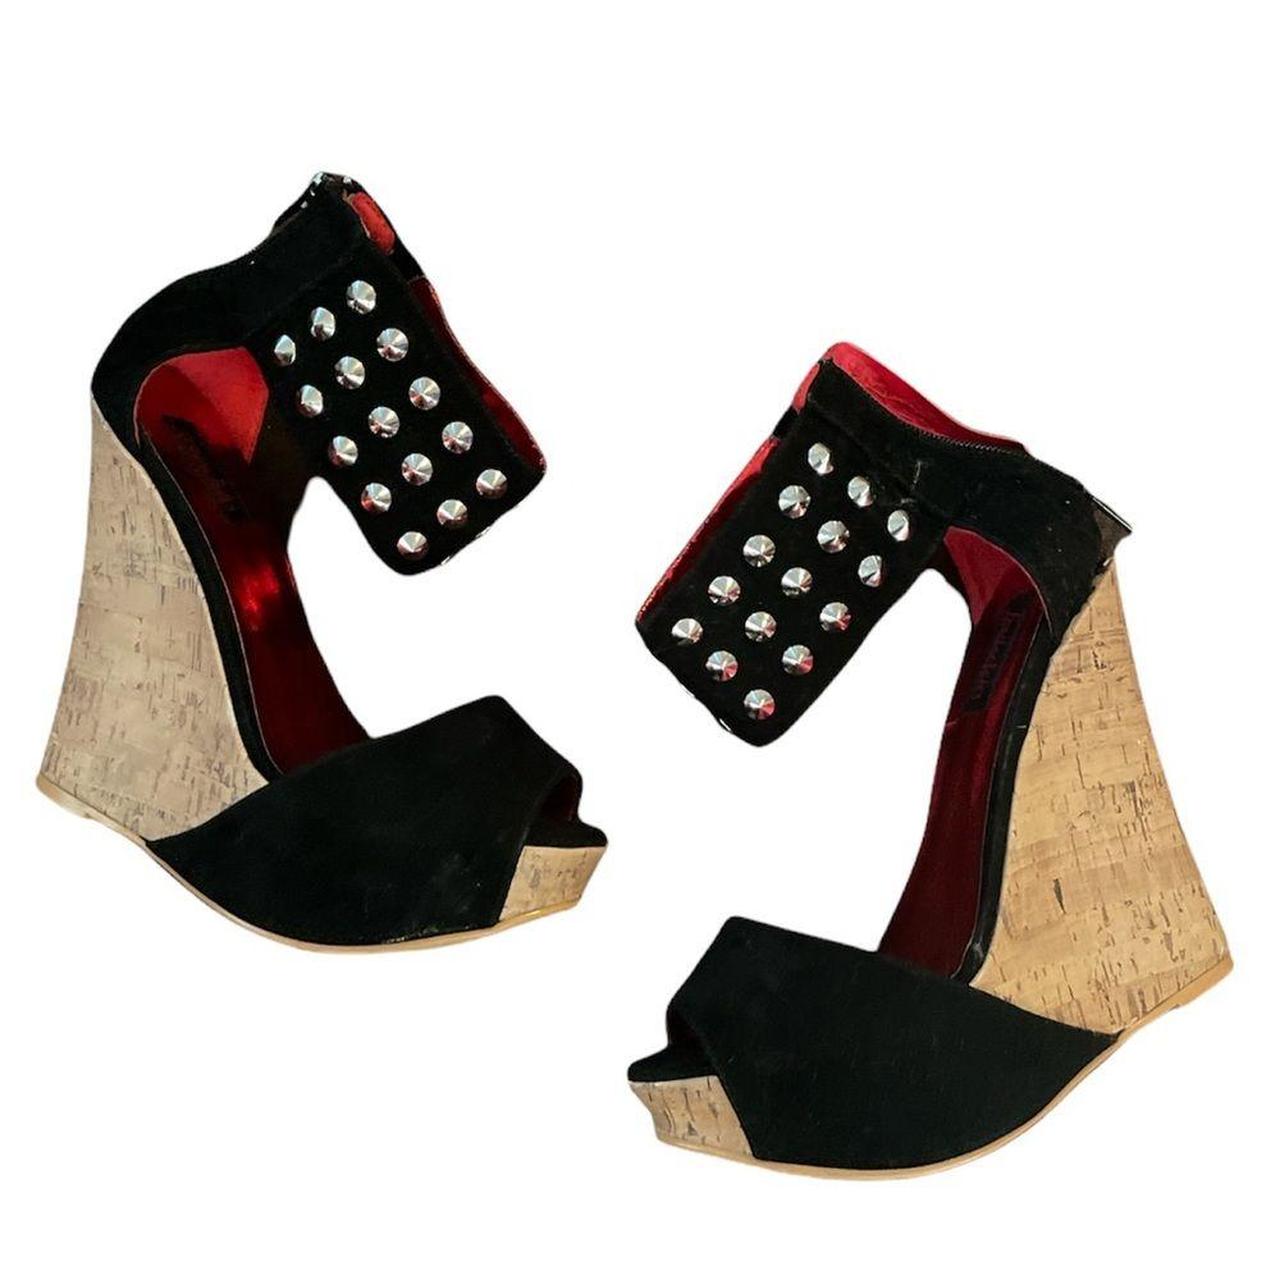 Product Image 1 - GUC
Clean
Cute
Comfy
#sexy #studded #wedge #Heels #sandals